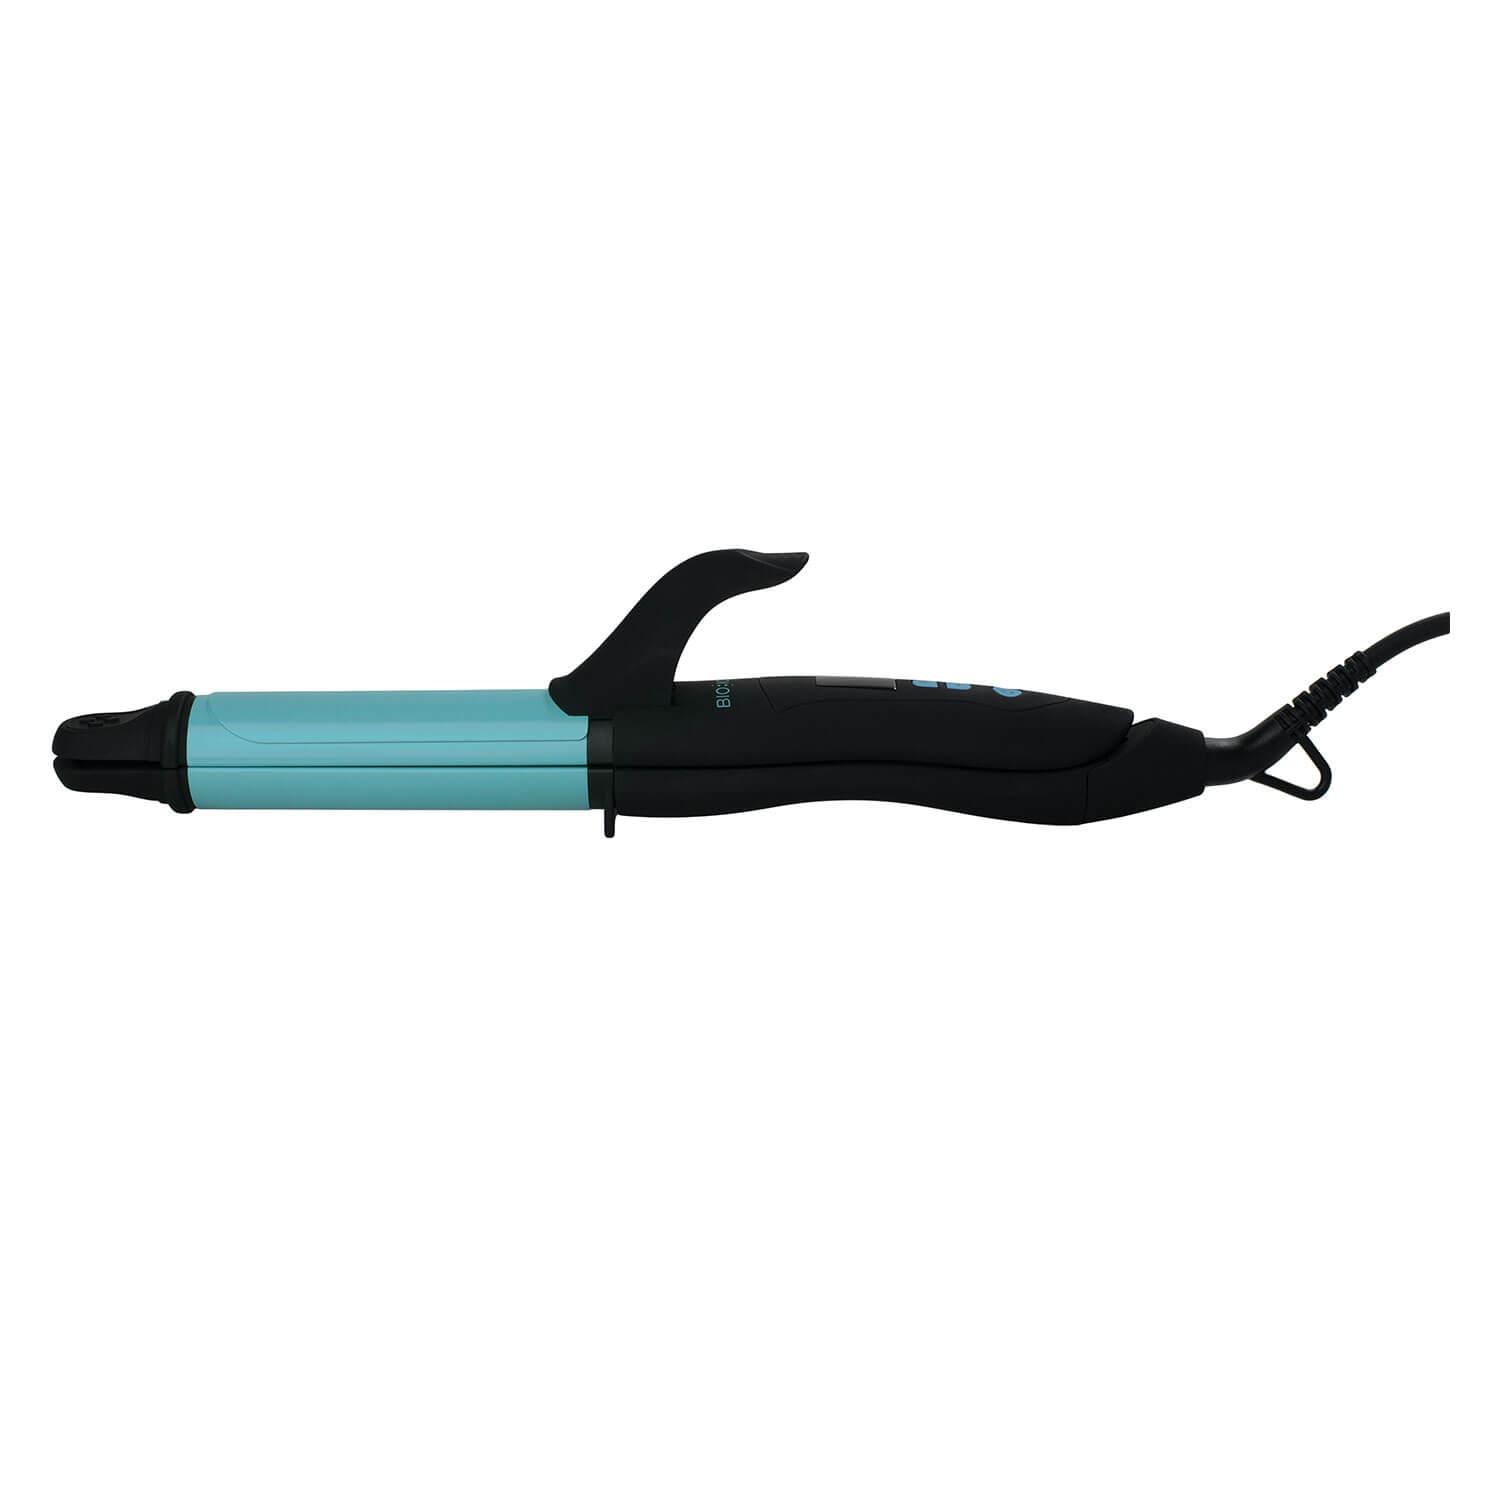 iTools - Bio Ionic 3-in-One Styling Iron 1.25"/3.2cm